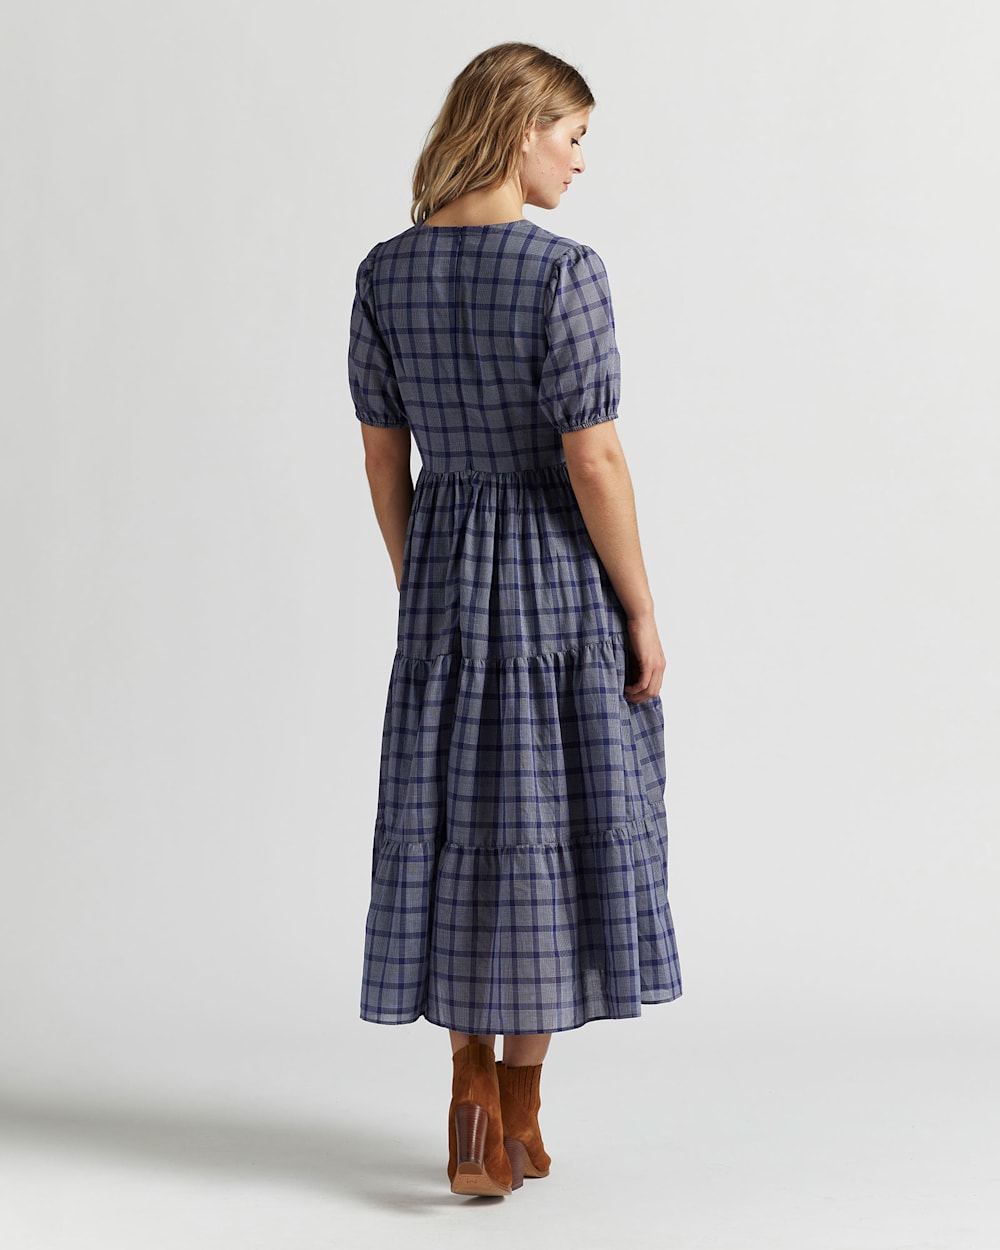 ALTERNATE VIEW OF AIRY TIERED MIDI DRESS IN NAVY/WHITE PLAID image number 3